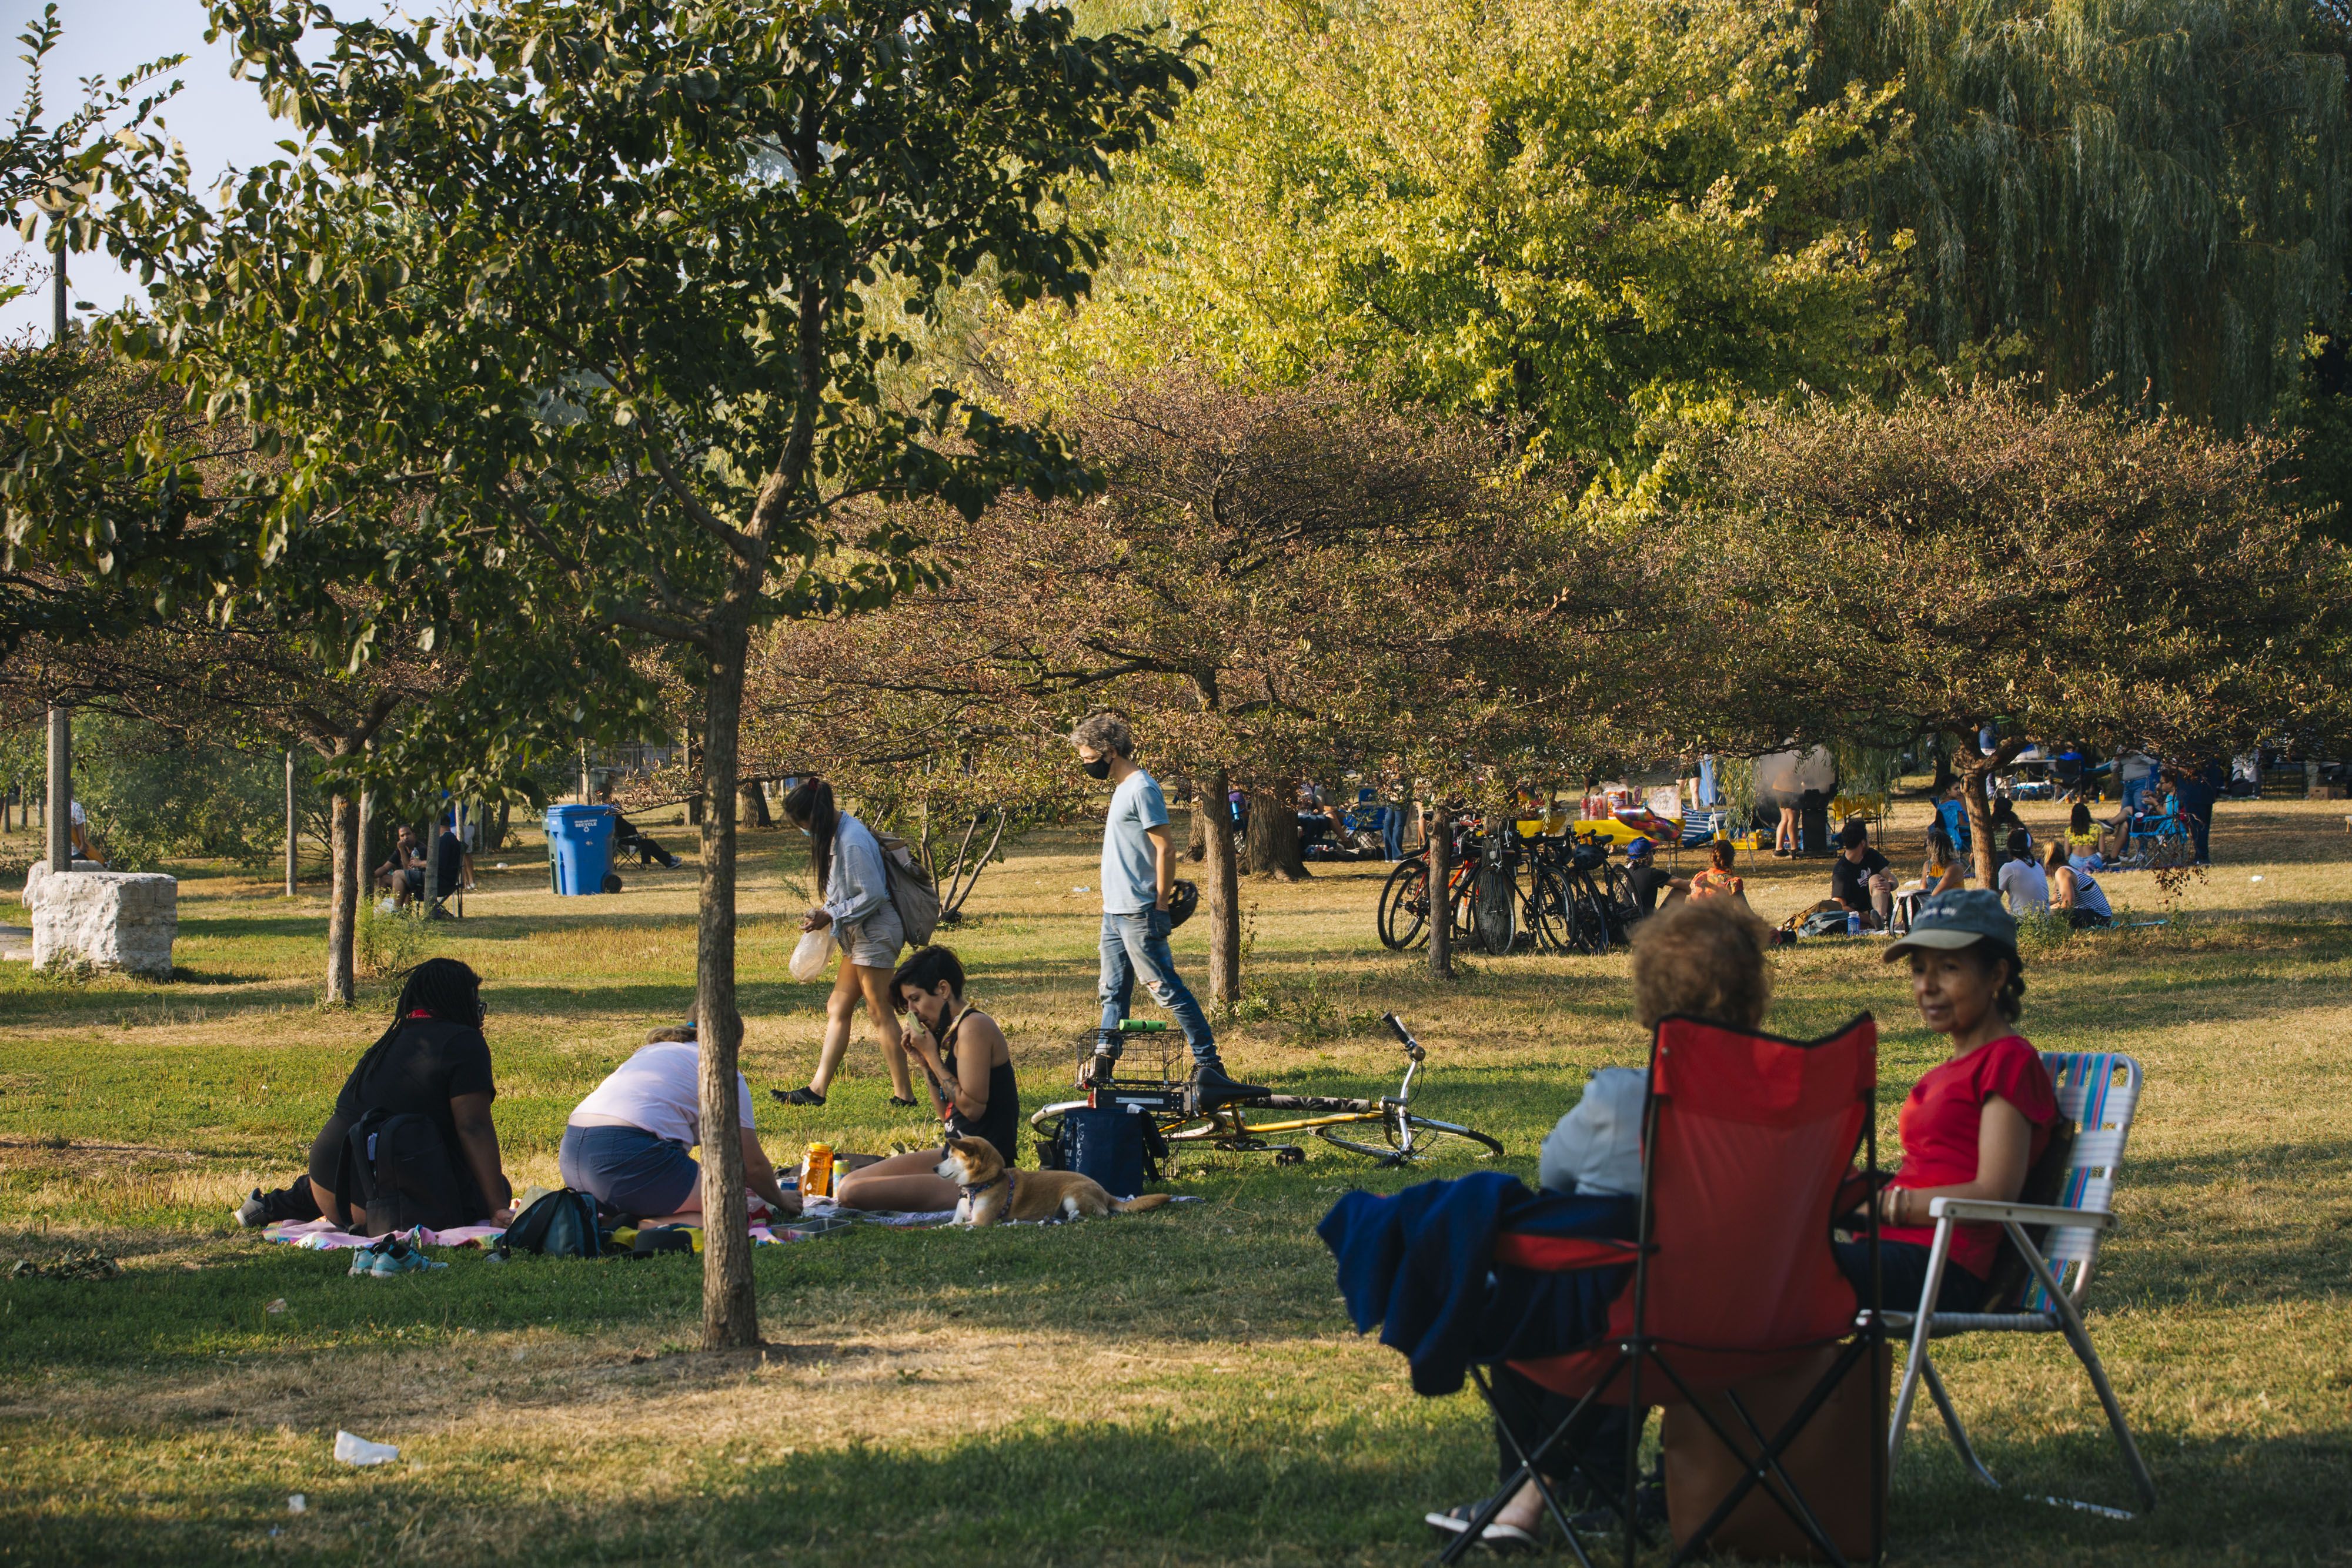 People gather in Humboldt Park, having picnics and sitting in lawn chairs chatting.